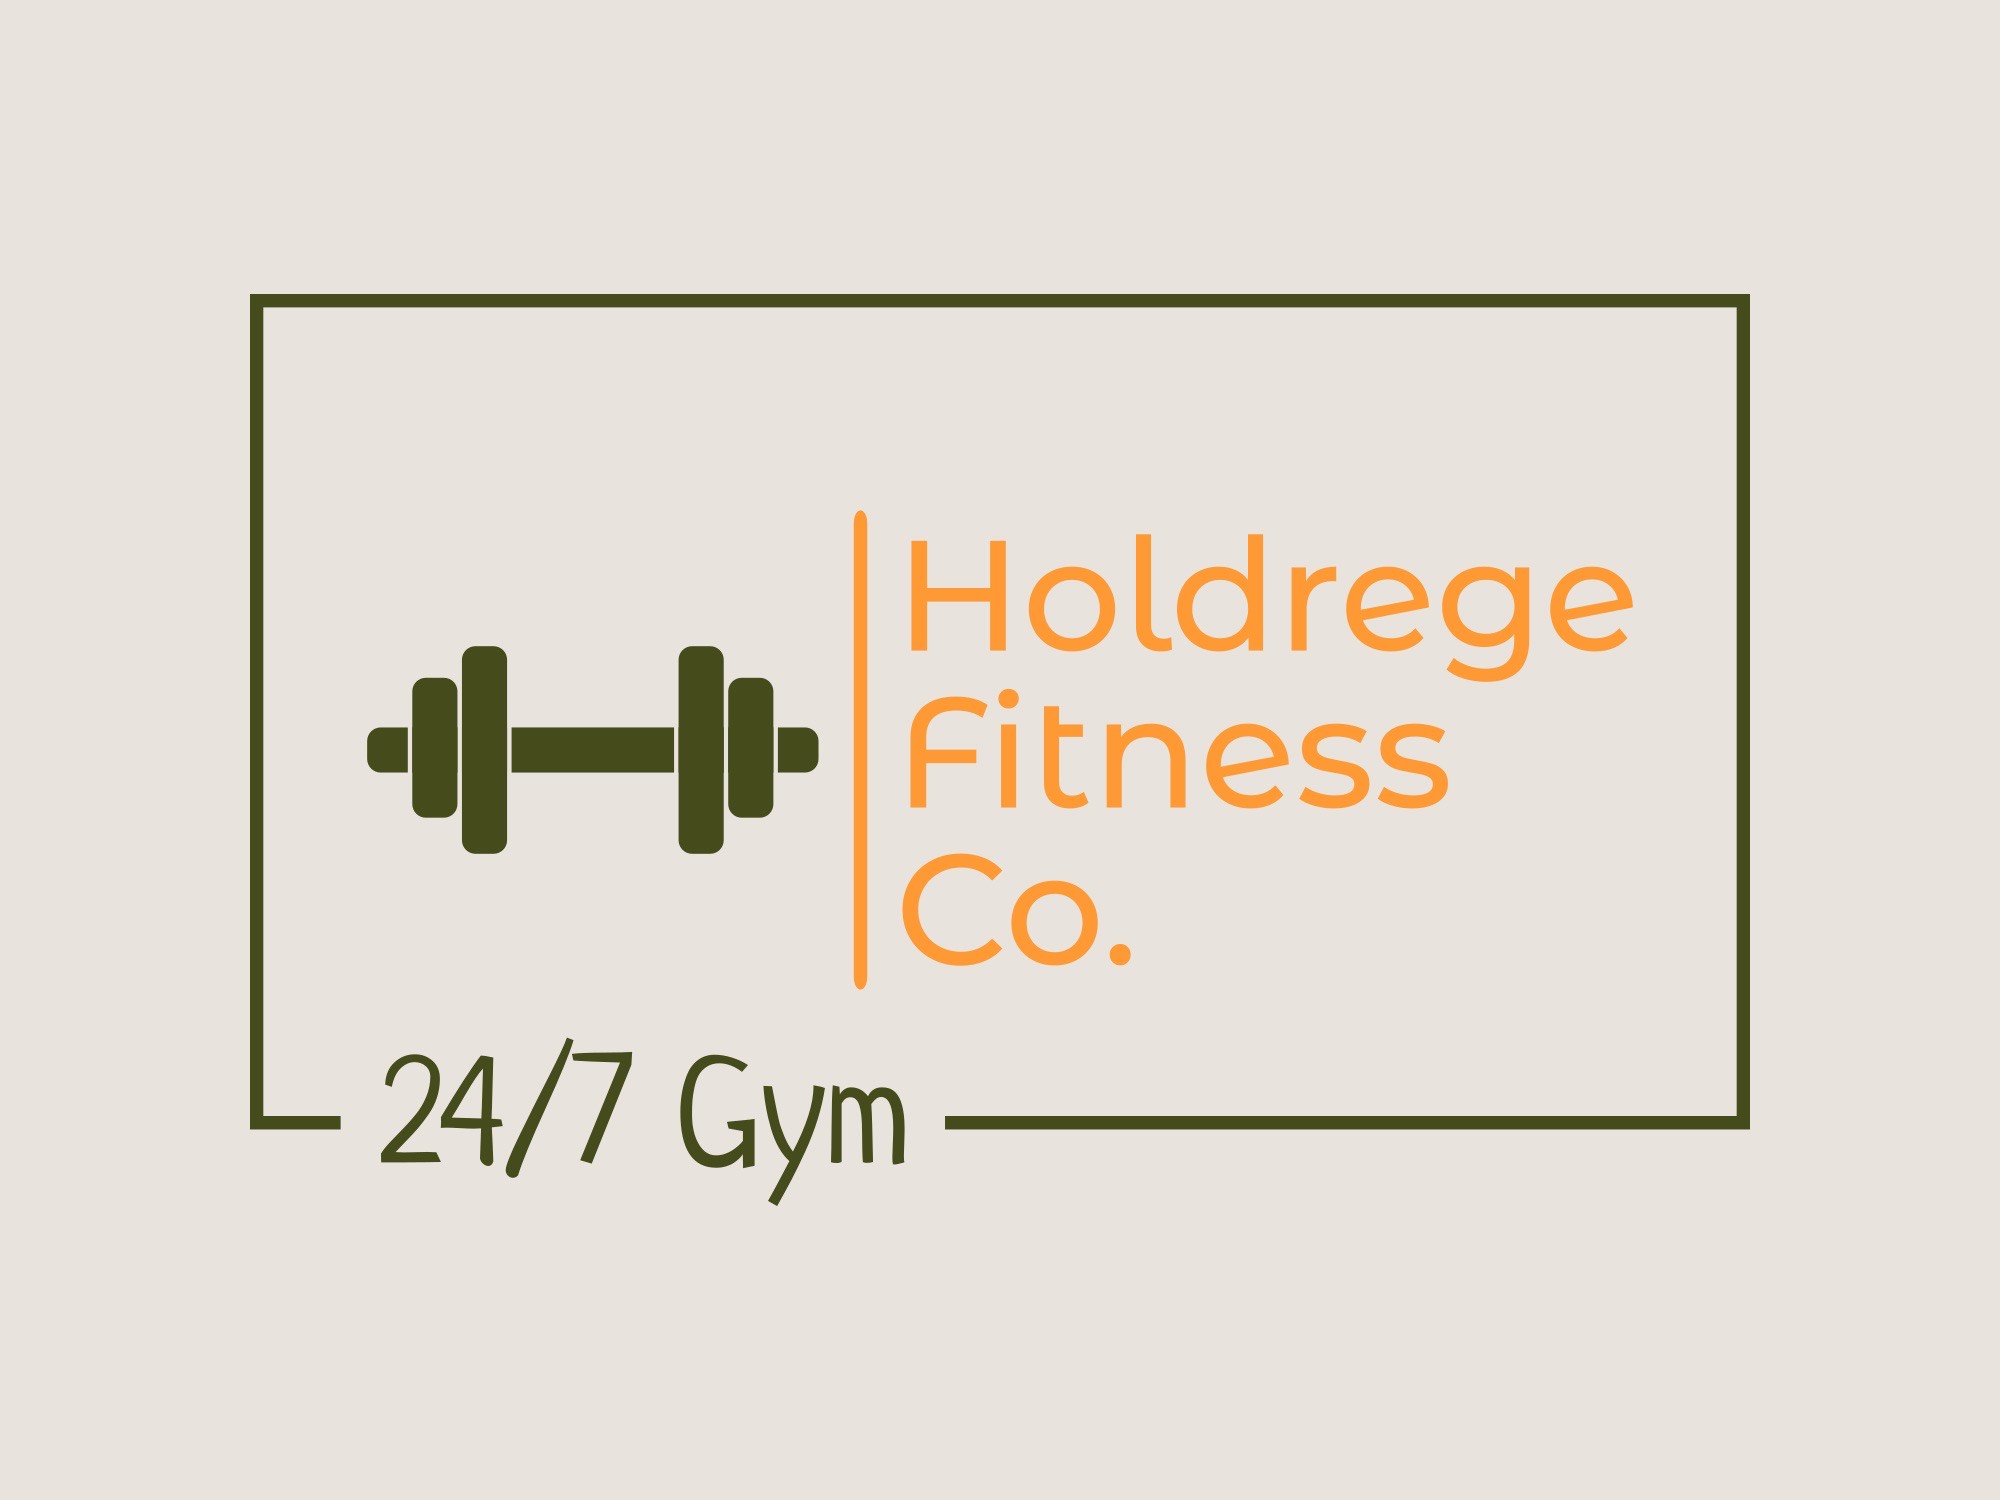 Holdrege Fitness Co.